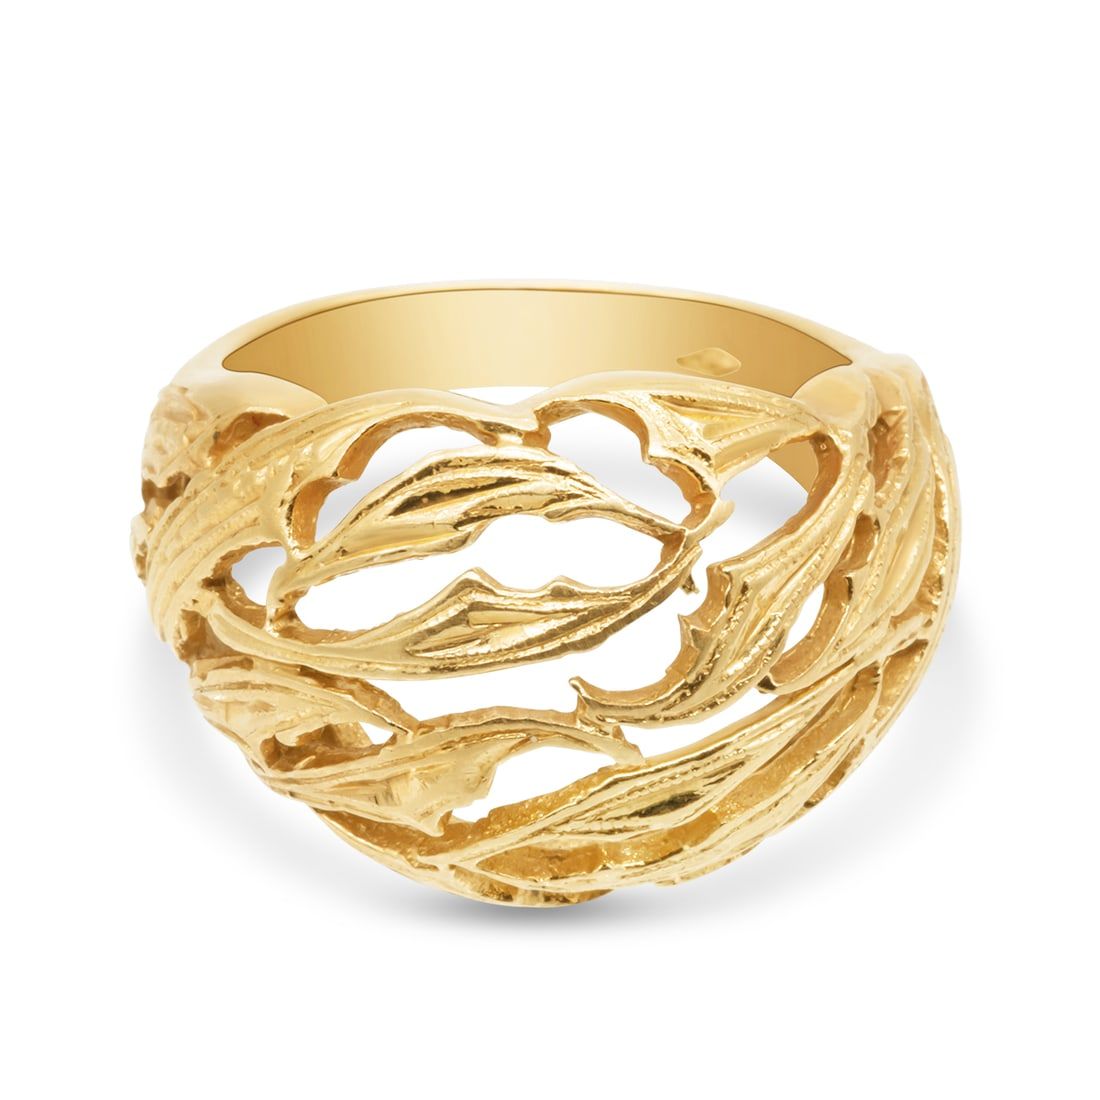 18K YELLOW GOLD DOMED LEAF RING18k 3d237f